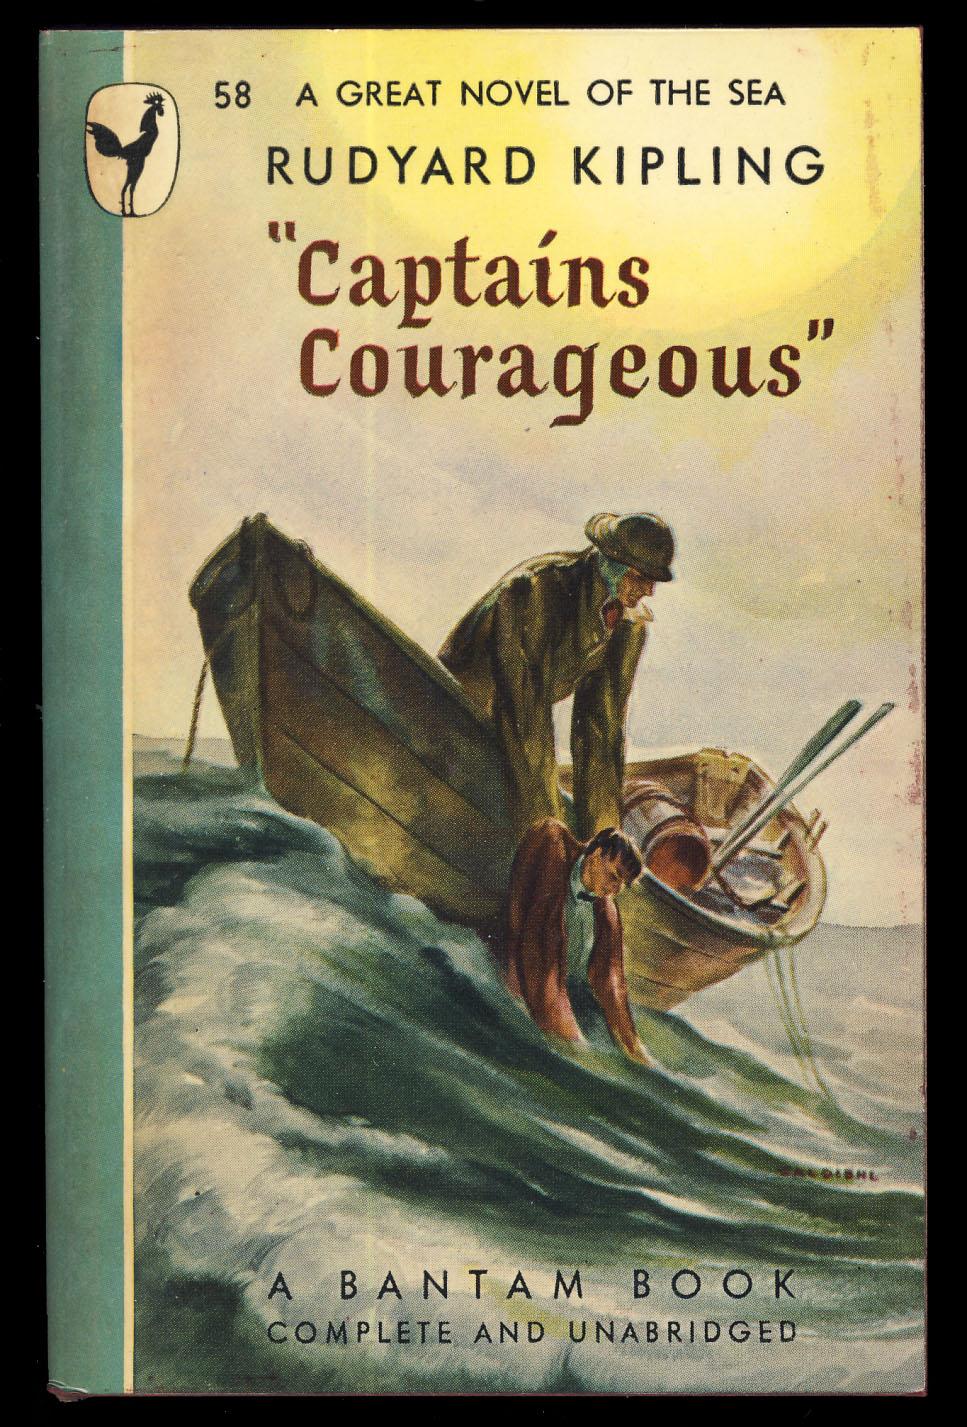 Captains Courageous by Kipling, Rudyard: Paperback (1946) First Edition. |  Parigi Books, ABAA/ILAB